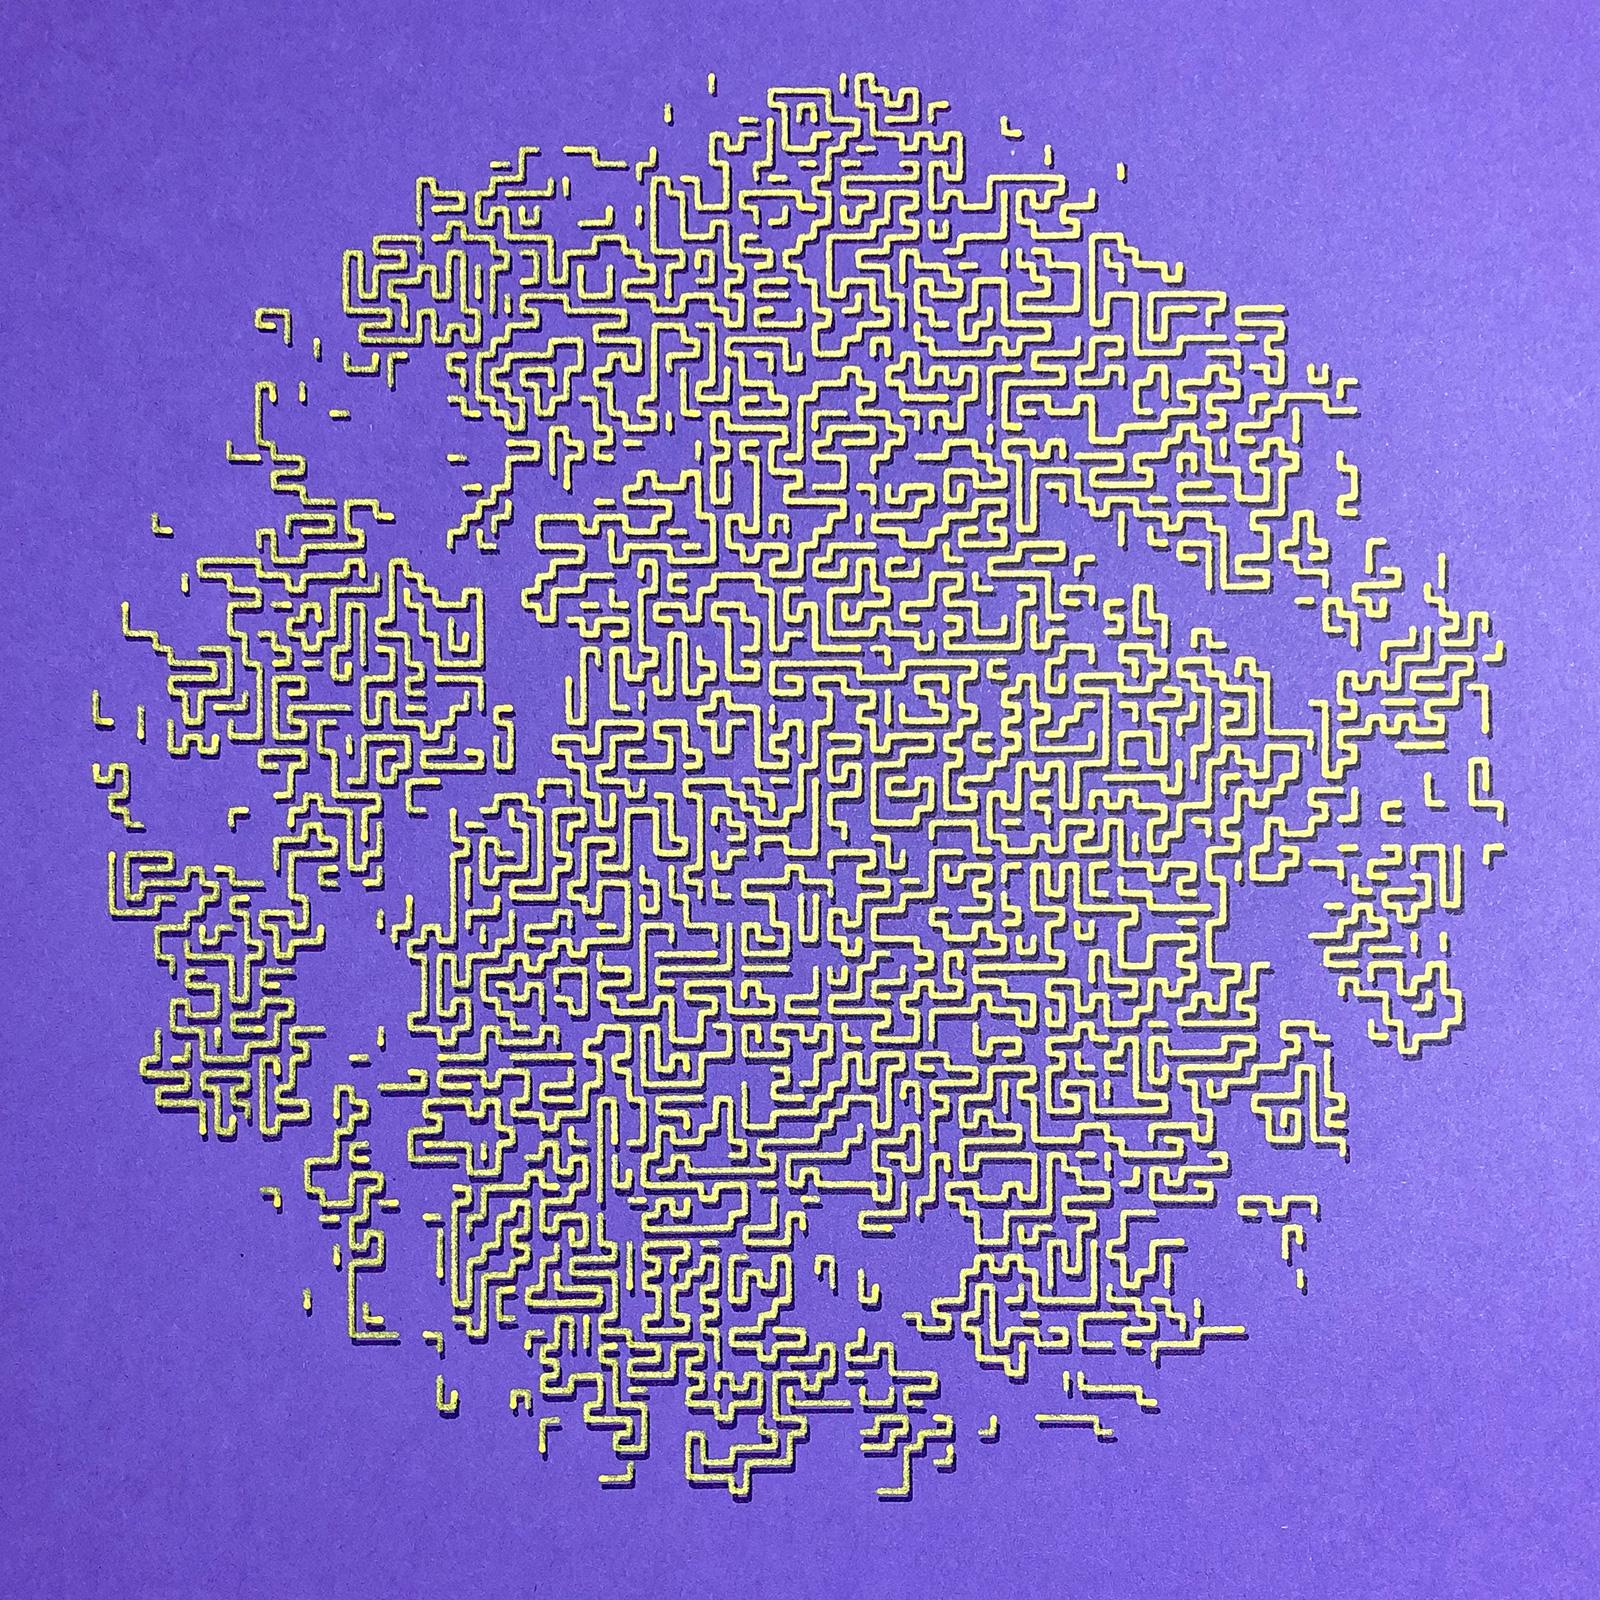 A grid of gold and dark purple lines on purple paper. The dark purple lines give the illusion of a shadow to the gold lines. The overall shape of the grid is a circle, but some lines are missing, leaving it looking weathered and uneven